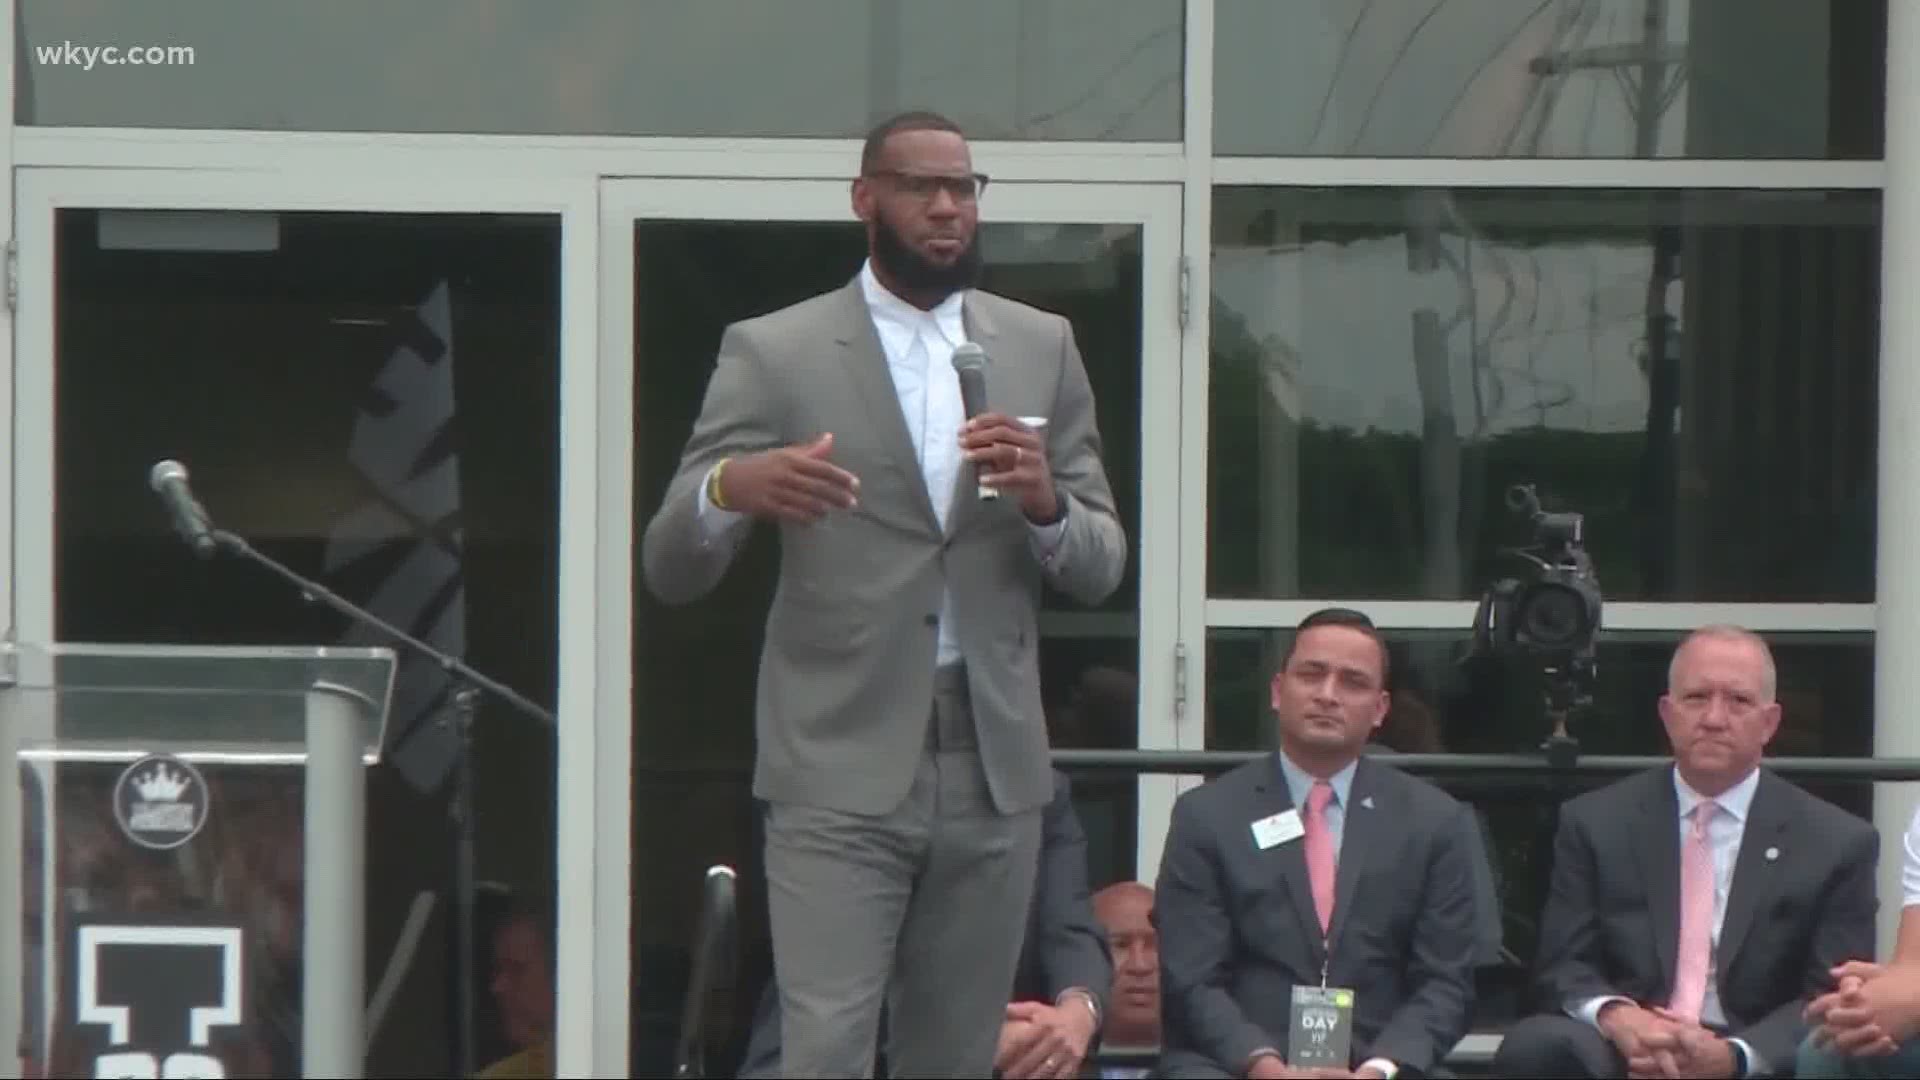 LeBron James has become a voice for people and he's helping kids with his "I Promise" school. He is influencing change in a positive way.